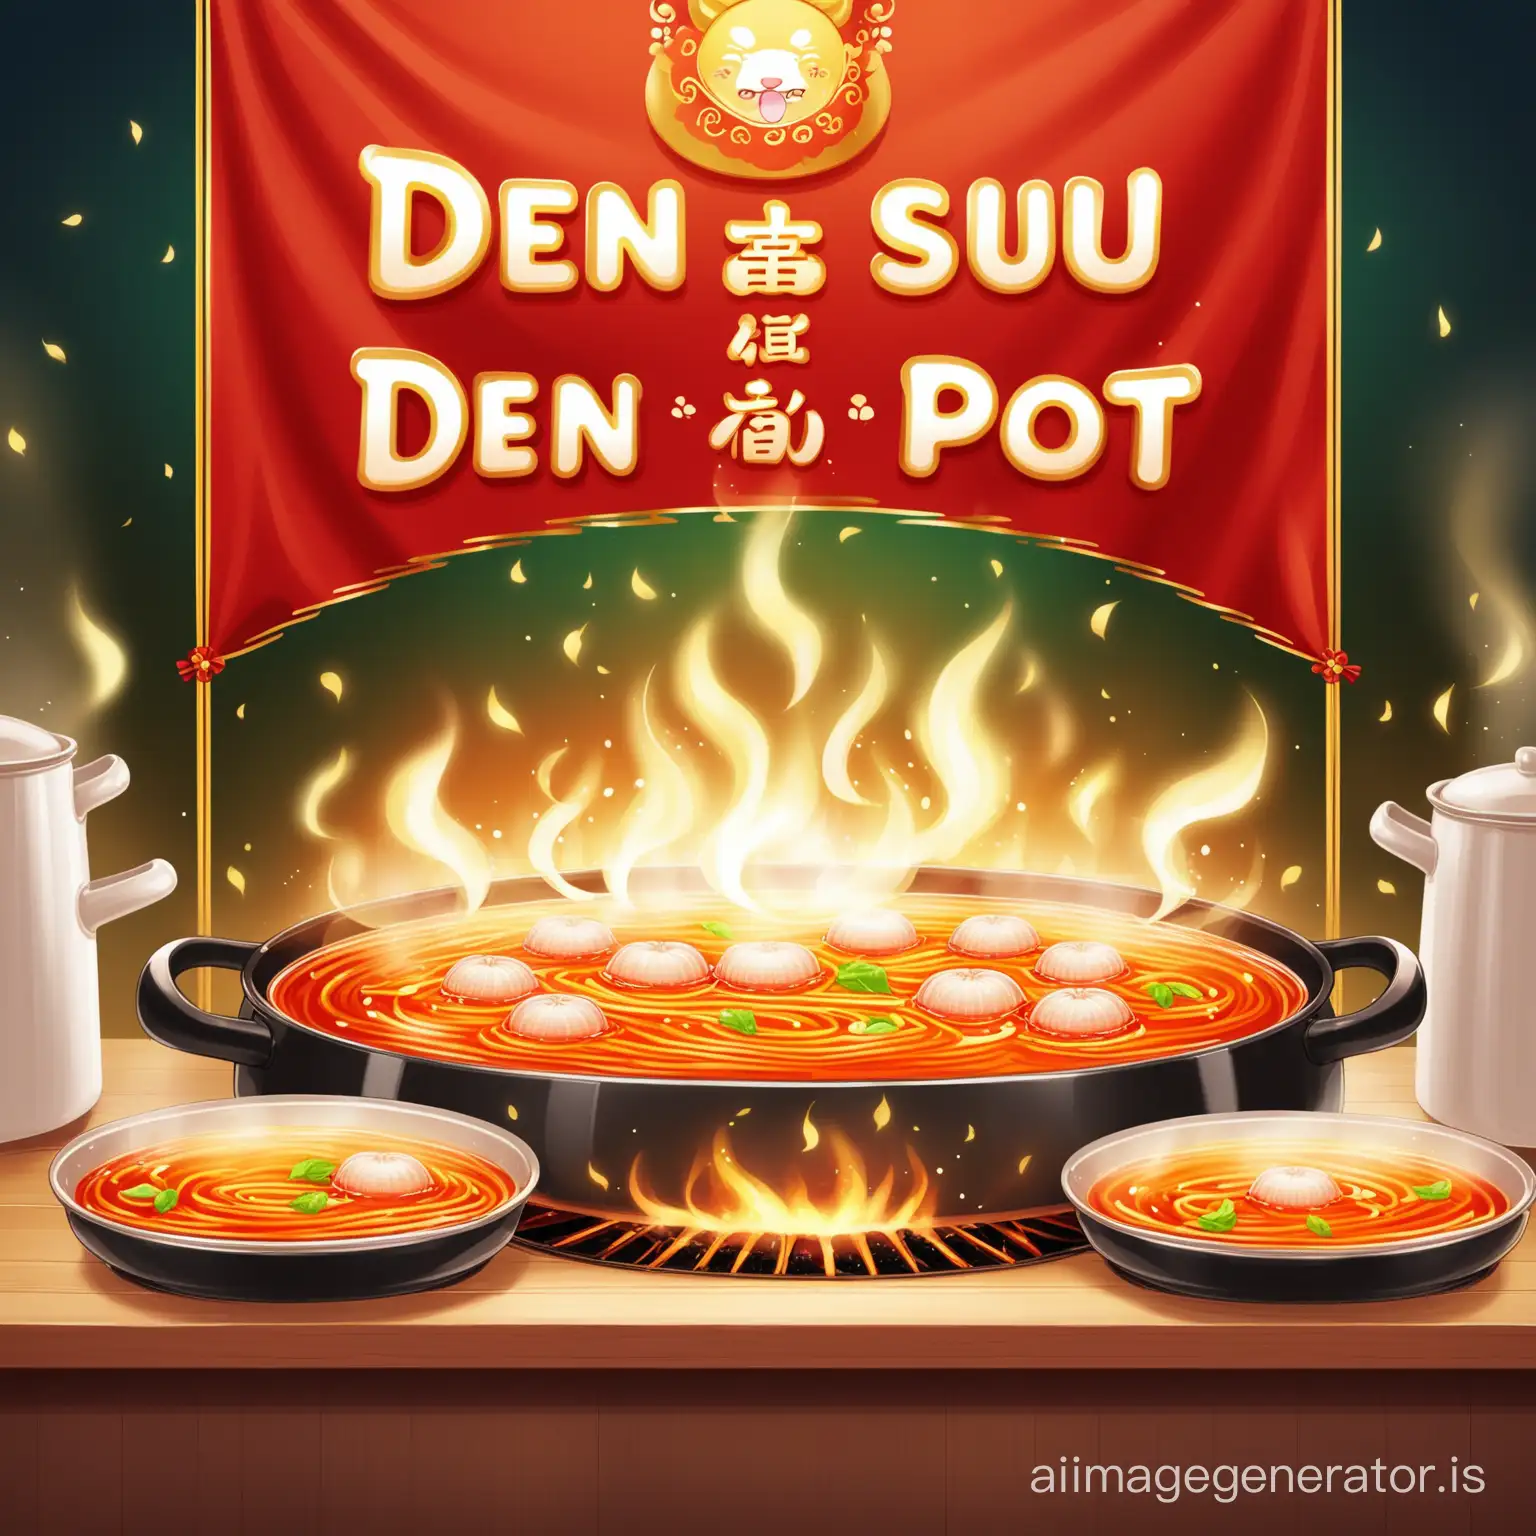 Create any image the title banner is "DEN DEN SU POT"